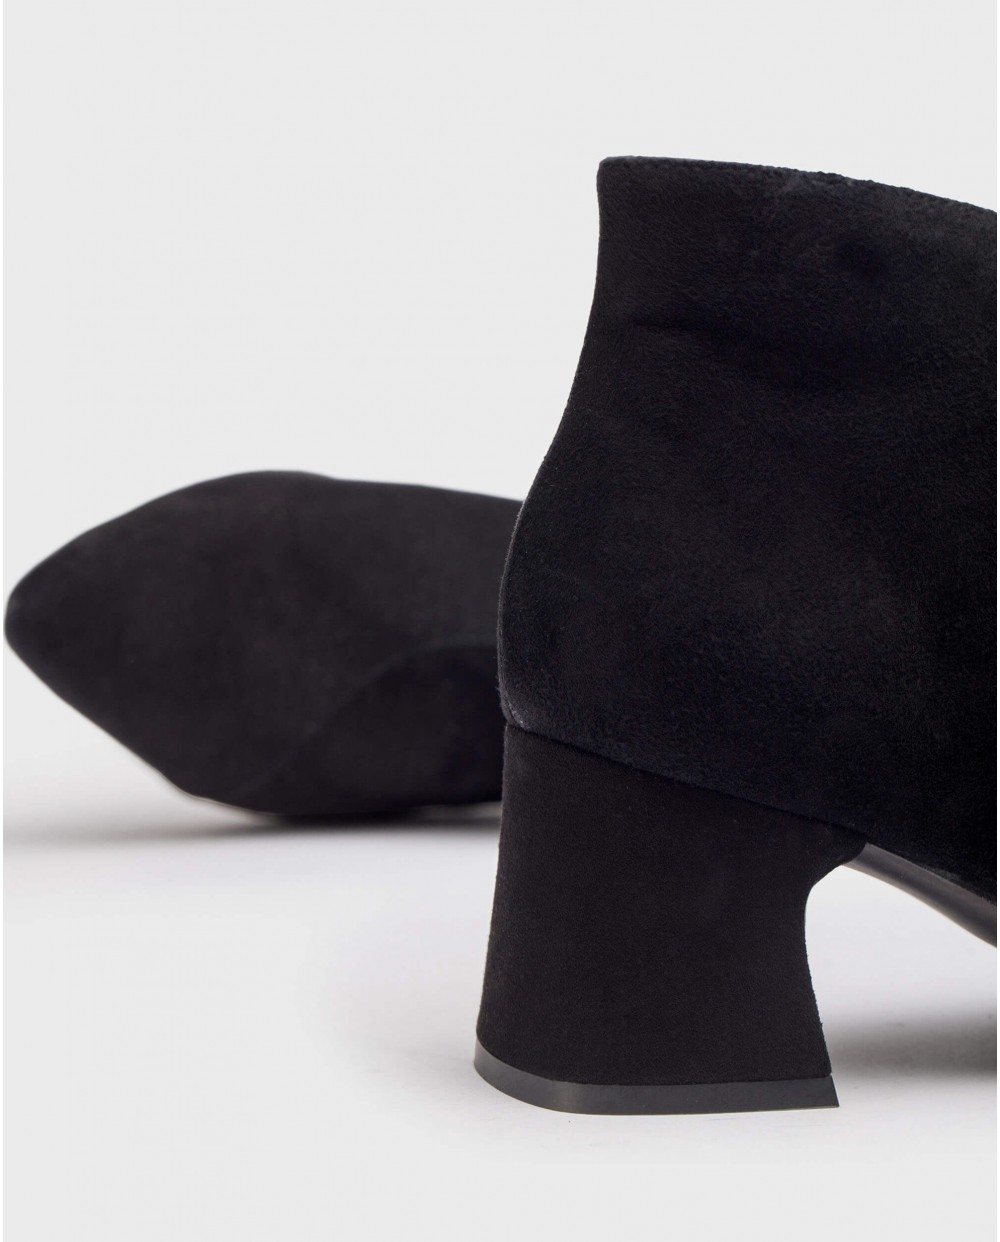 Wonders-Ankle Boots-Black ELIOT ankle boot